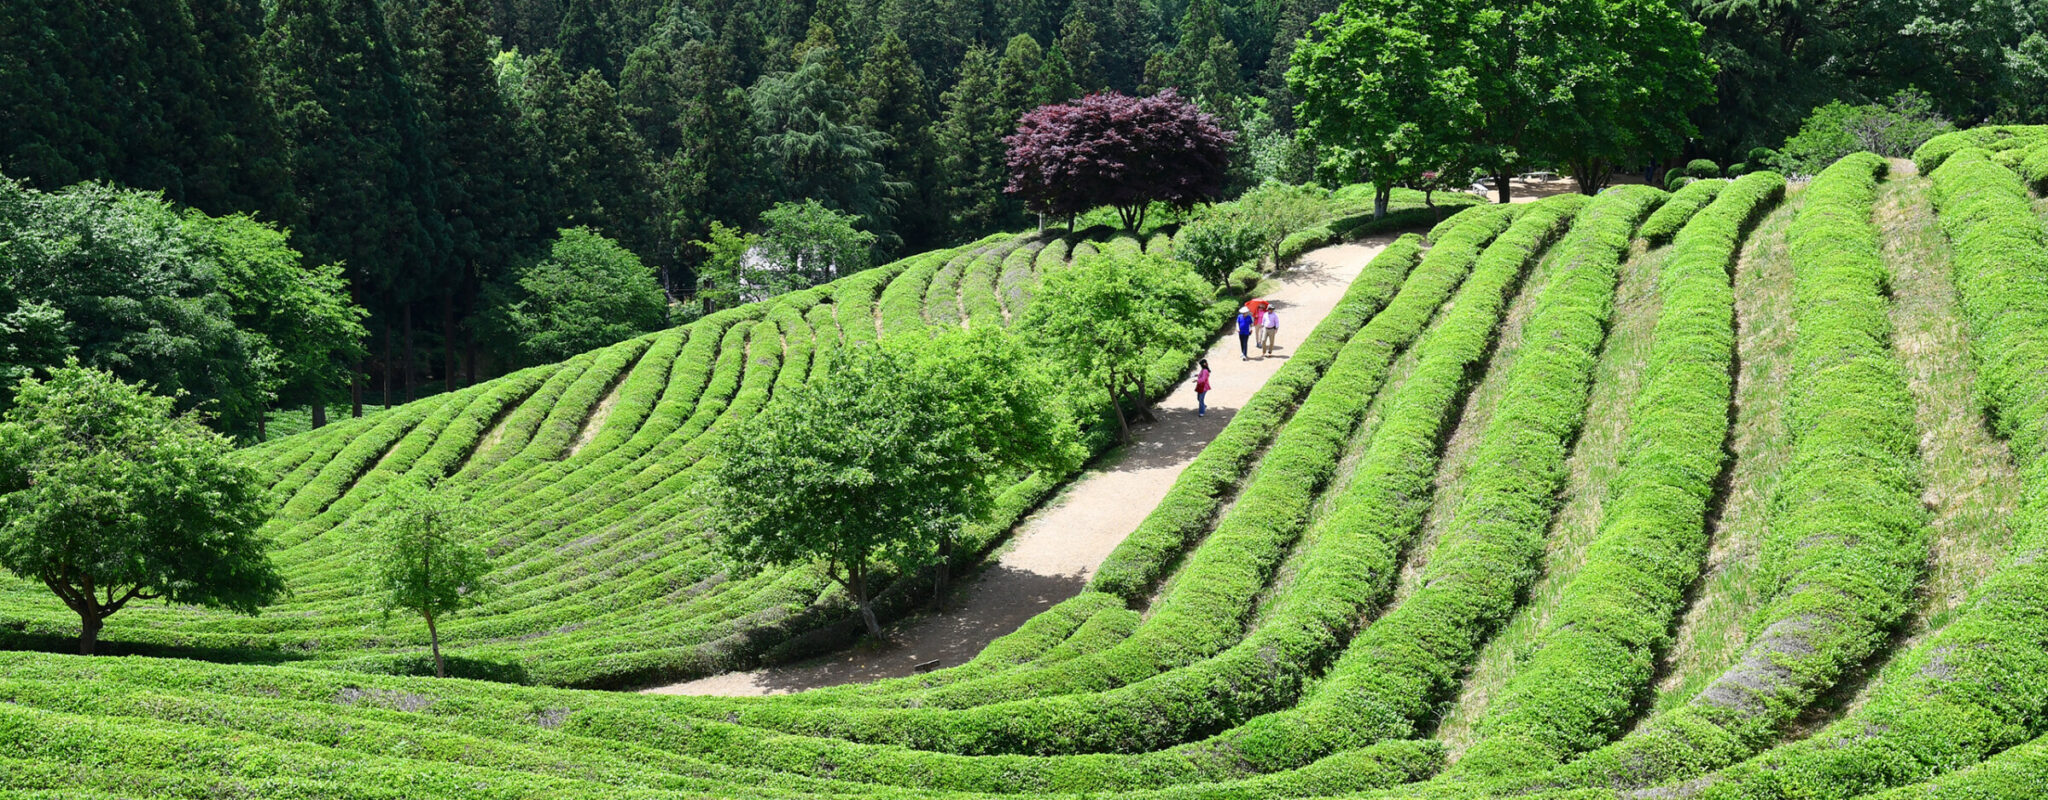 People are seen walking through terraces of neatly planted tea in South Korea